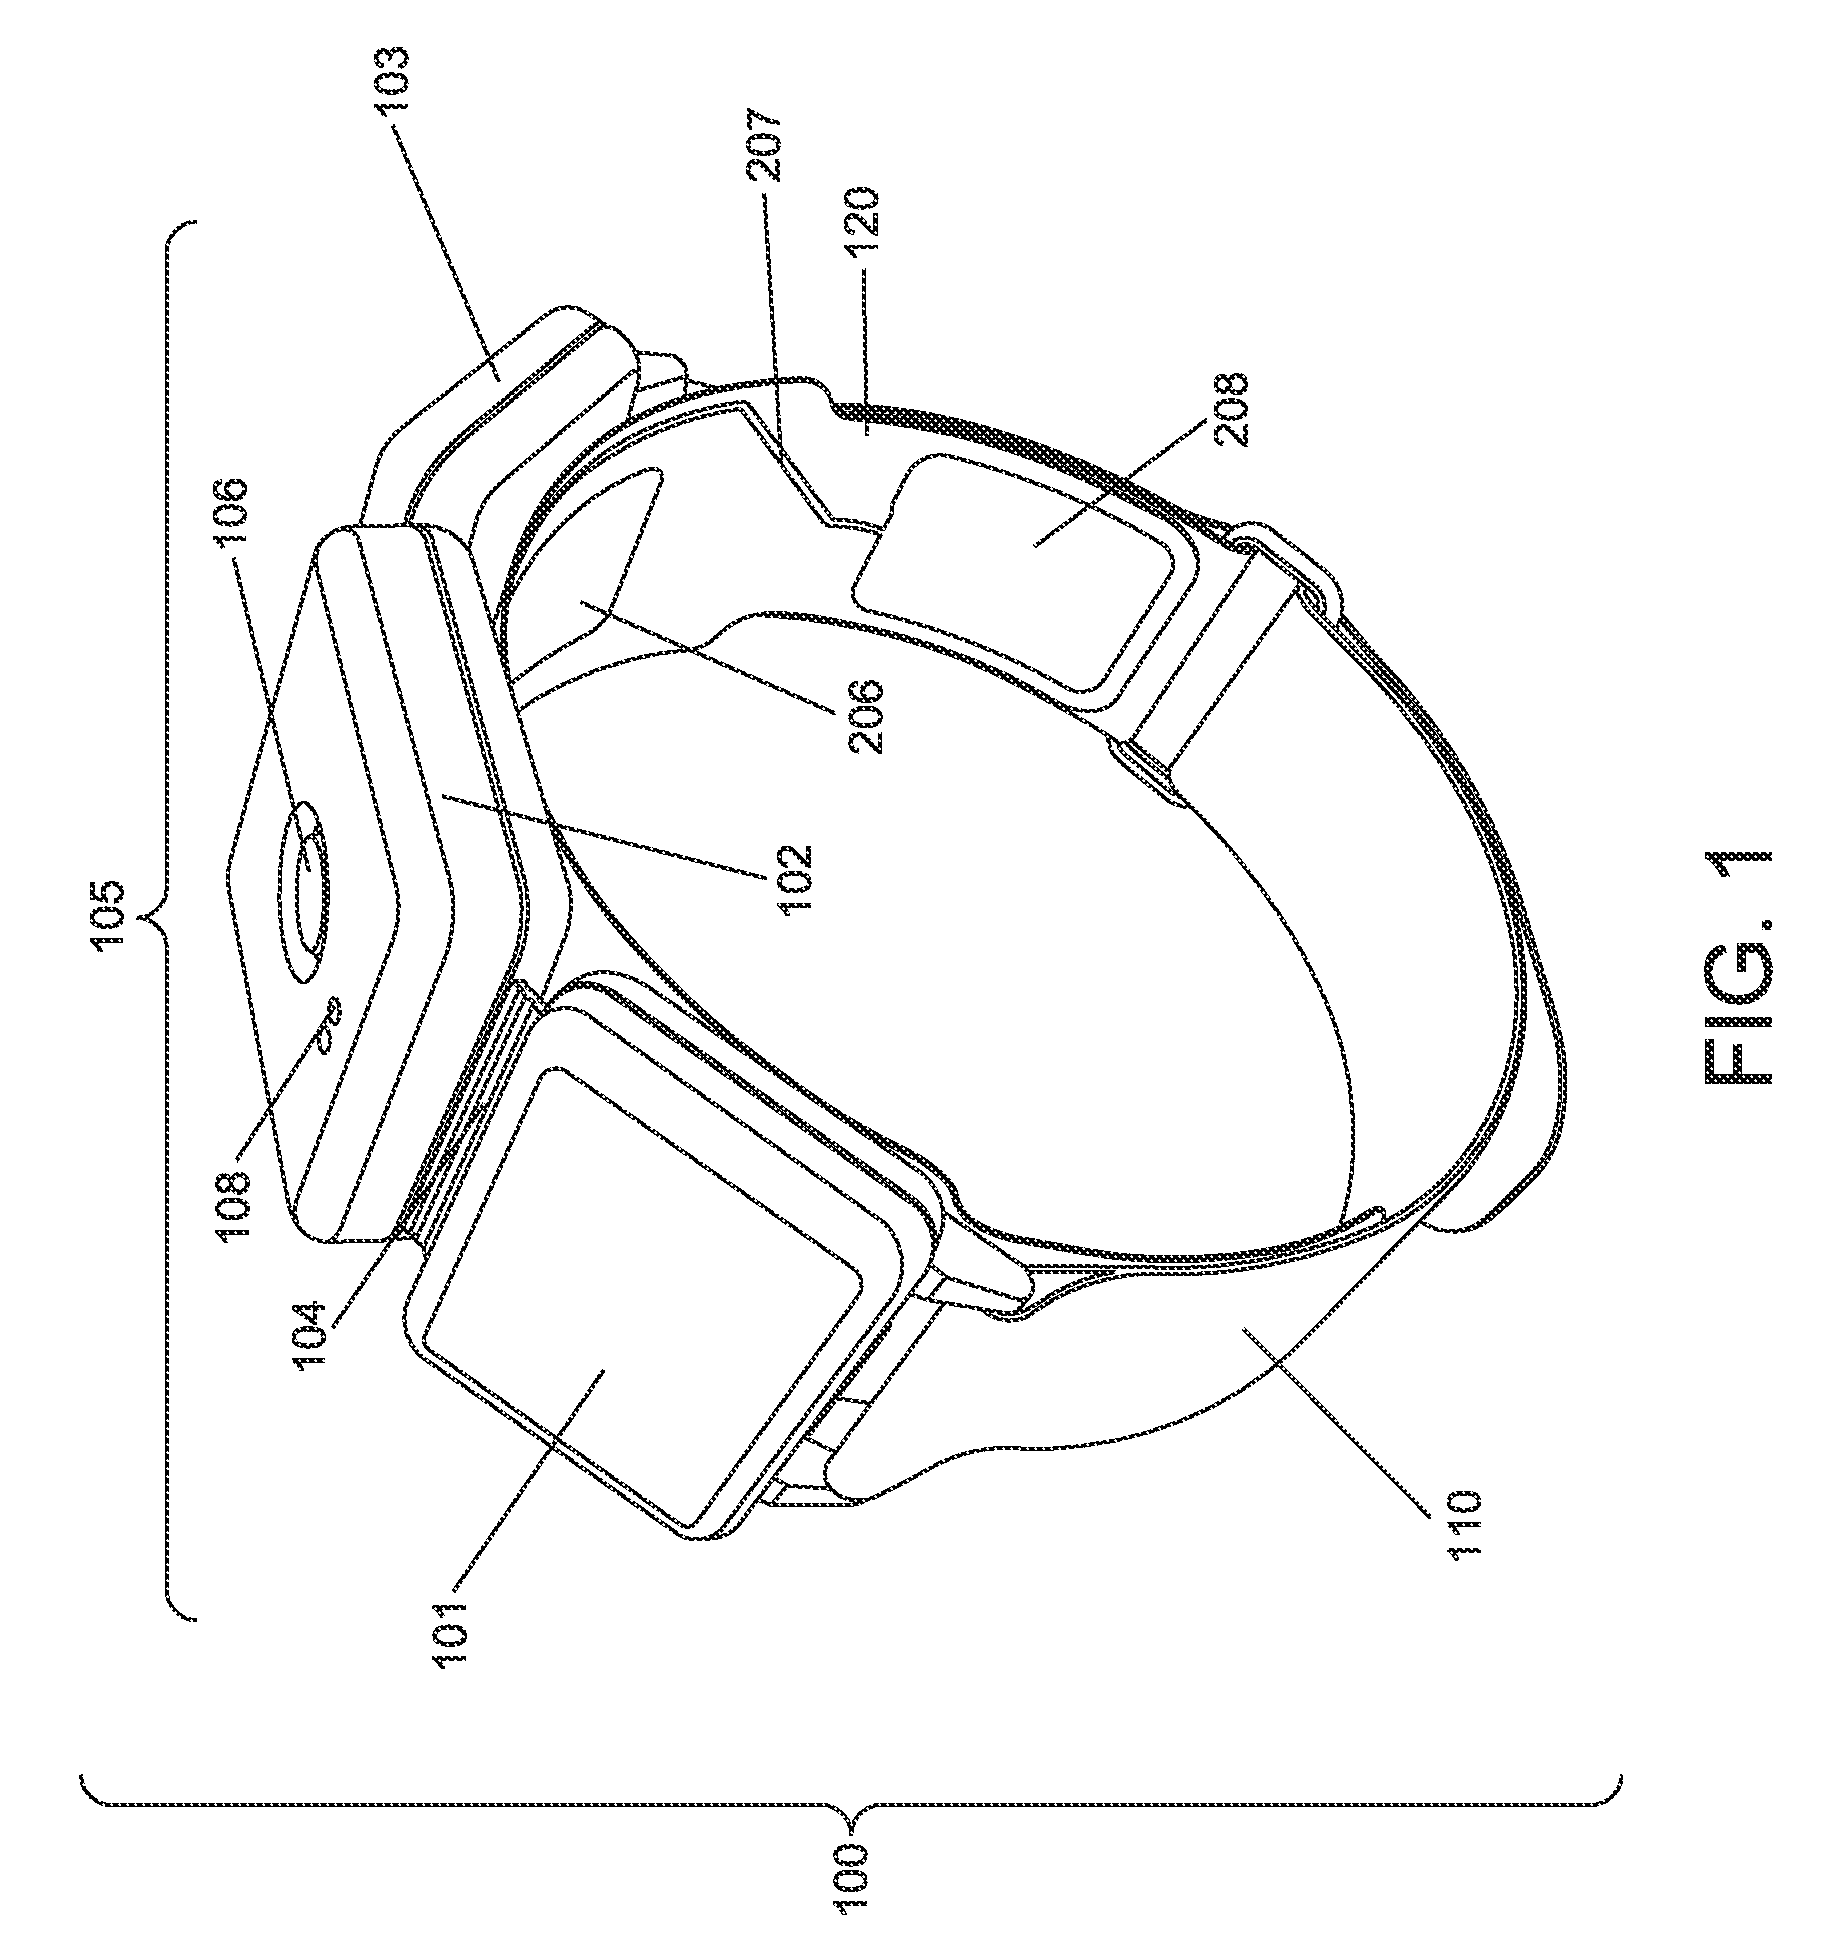 Apparatus and method for relieving pain using transcutaneous electrical nerve stimulation